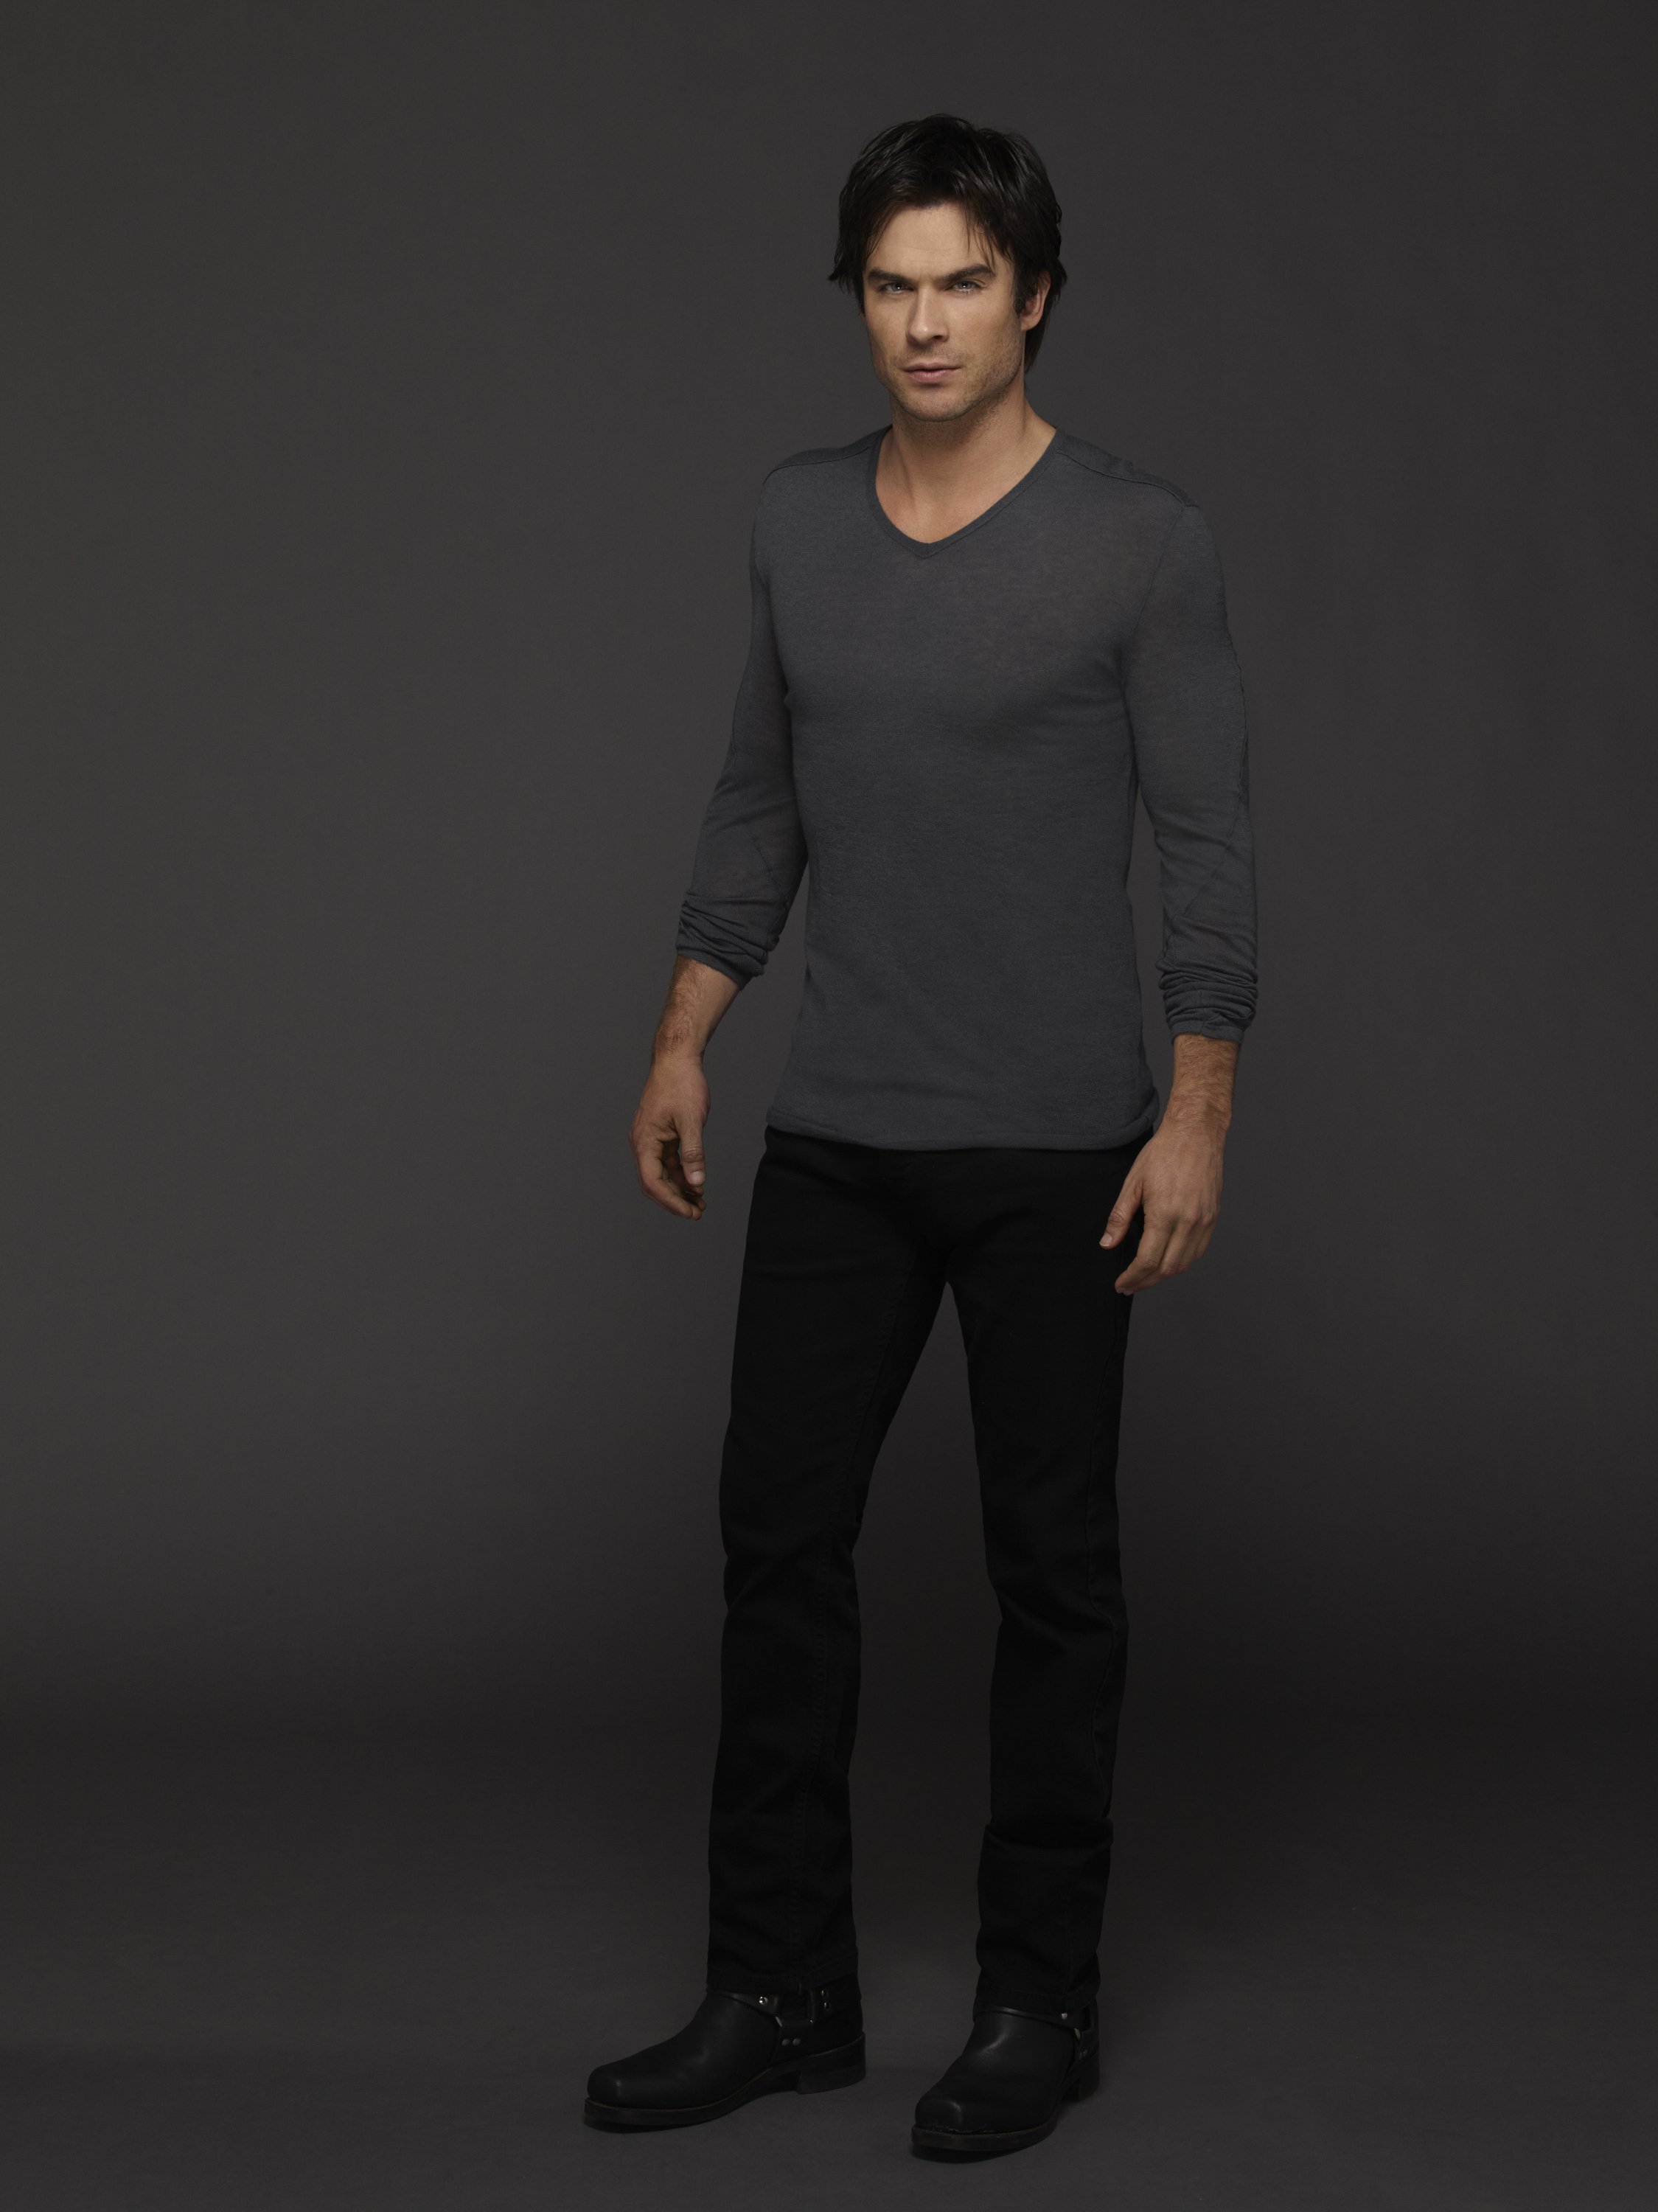 Salvatore/Appearance | The Vampire Wiki |